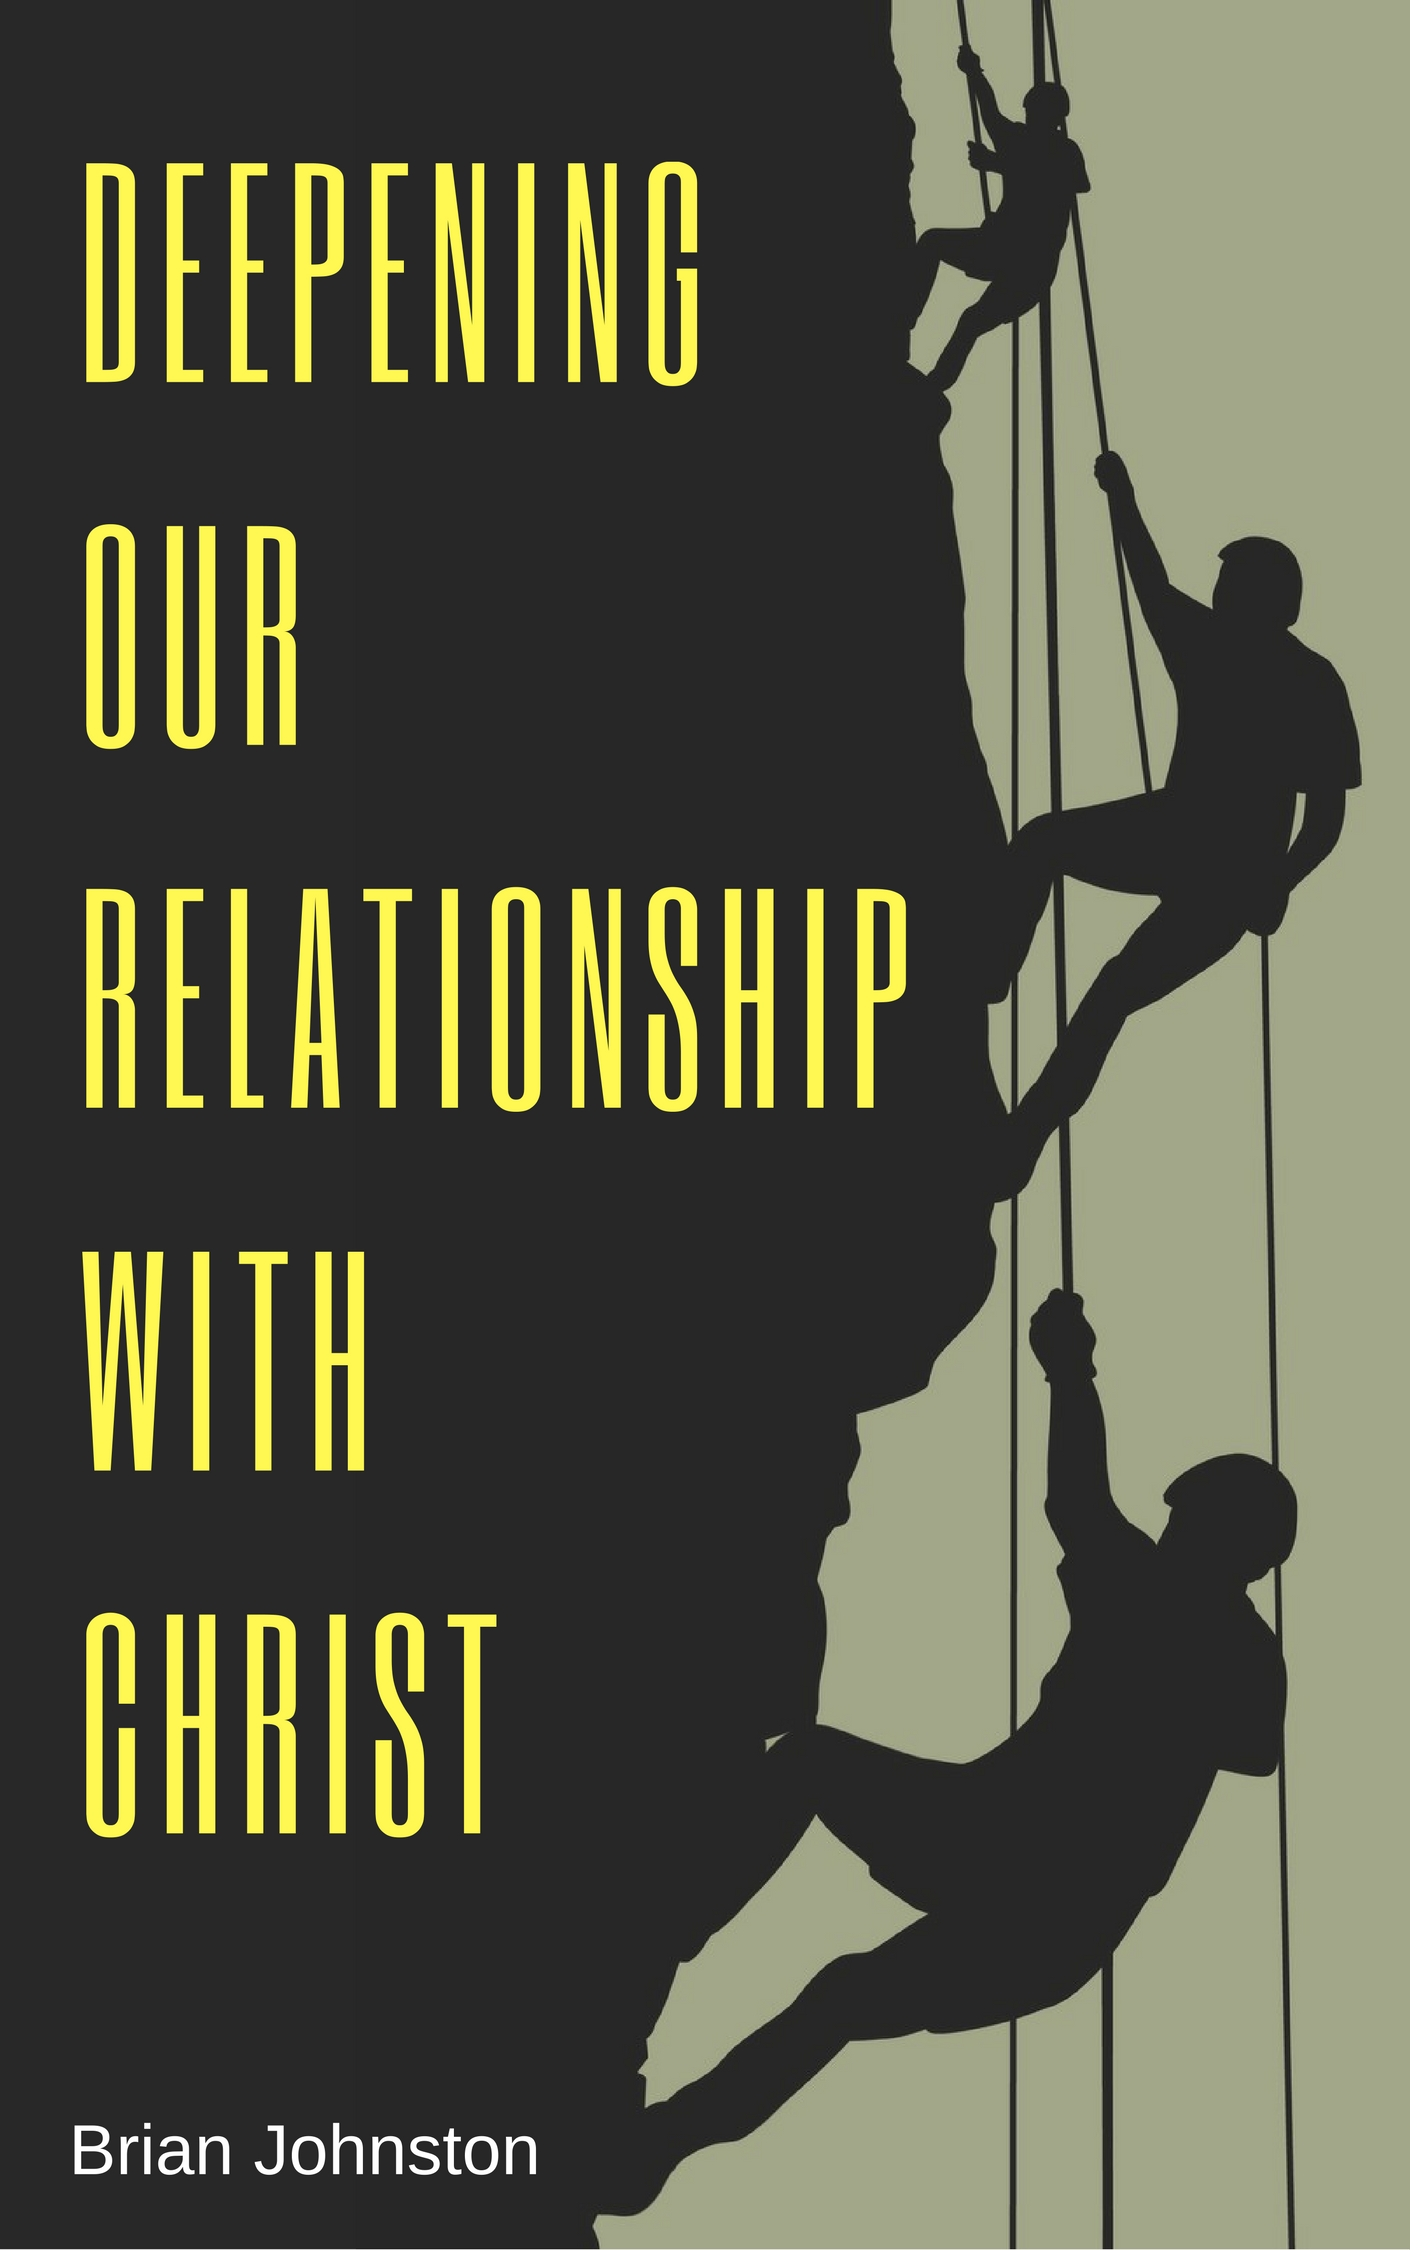 Deepening Our Relationship With Christ: Part 1 - Being in Union With Him